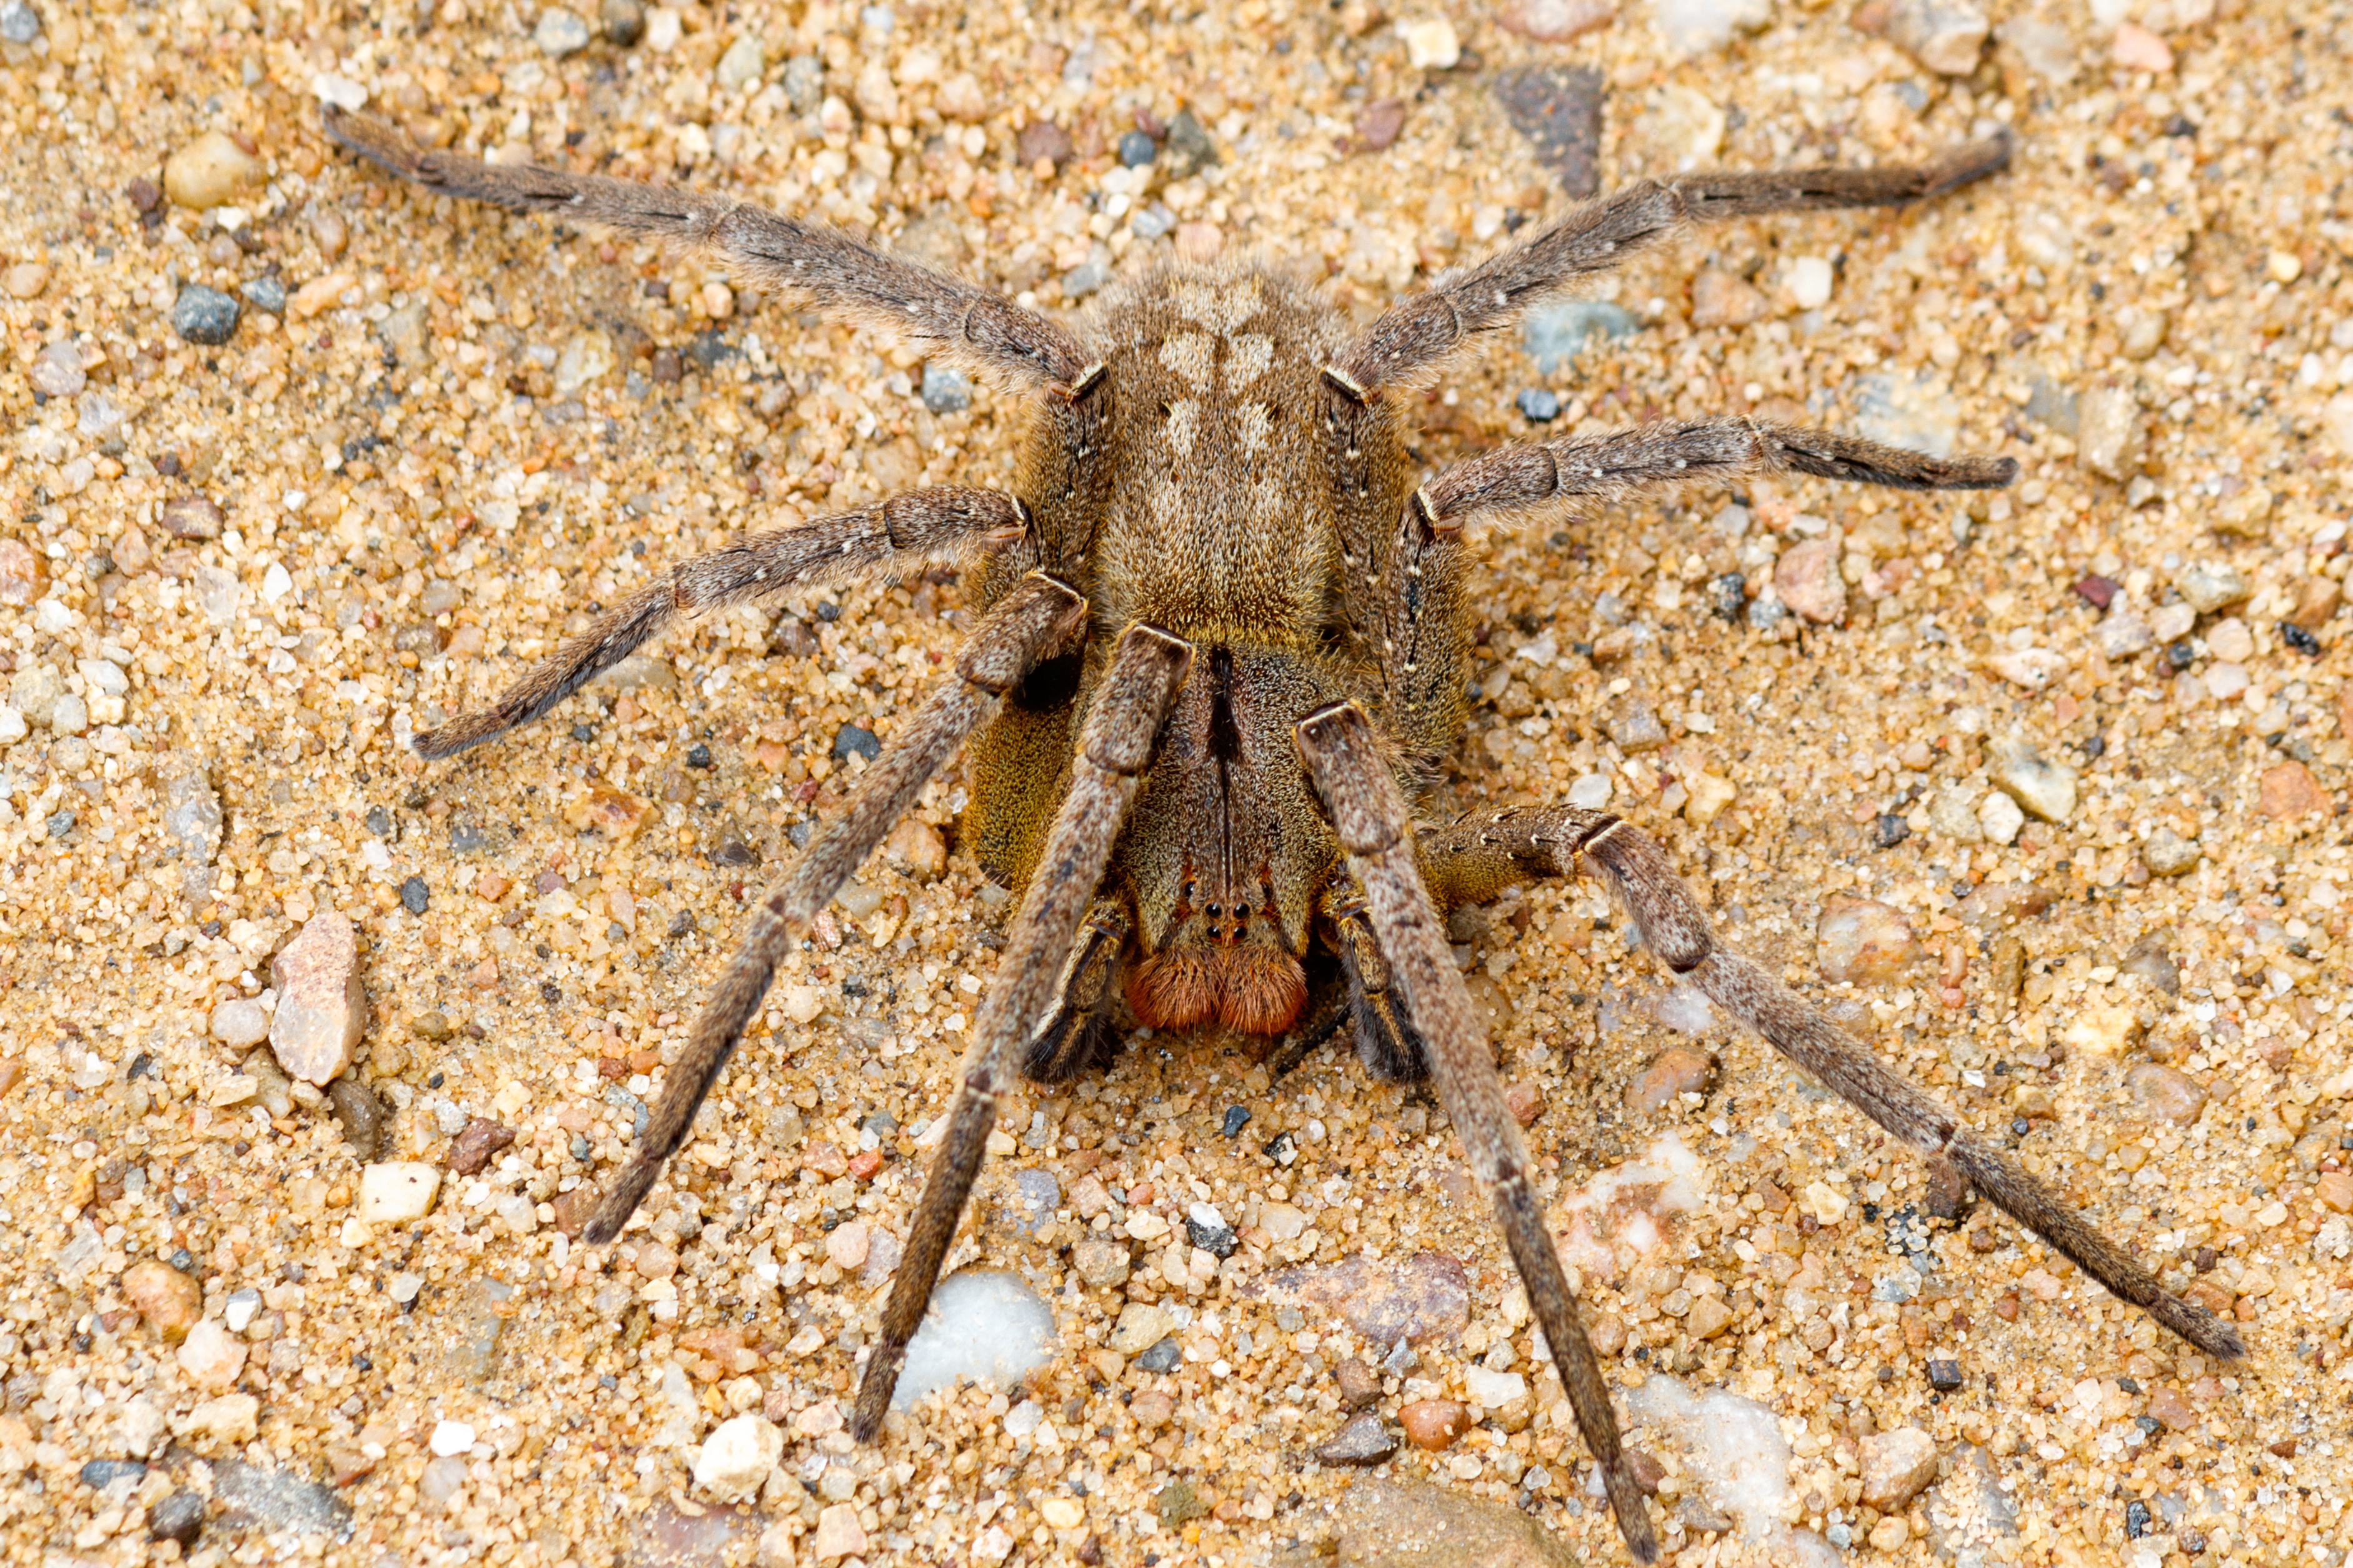 Are Brazilian wandering spiders poisonous to humans?